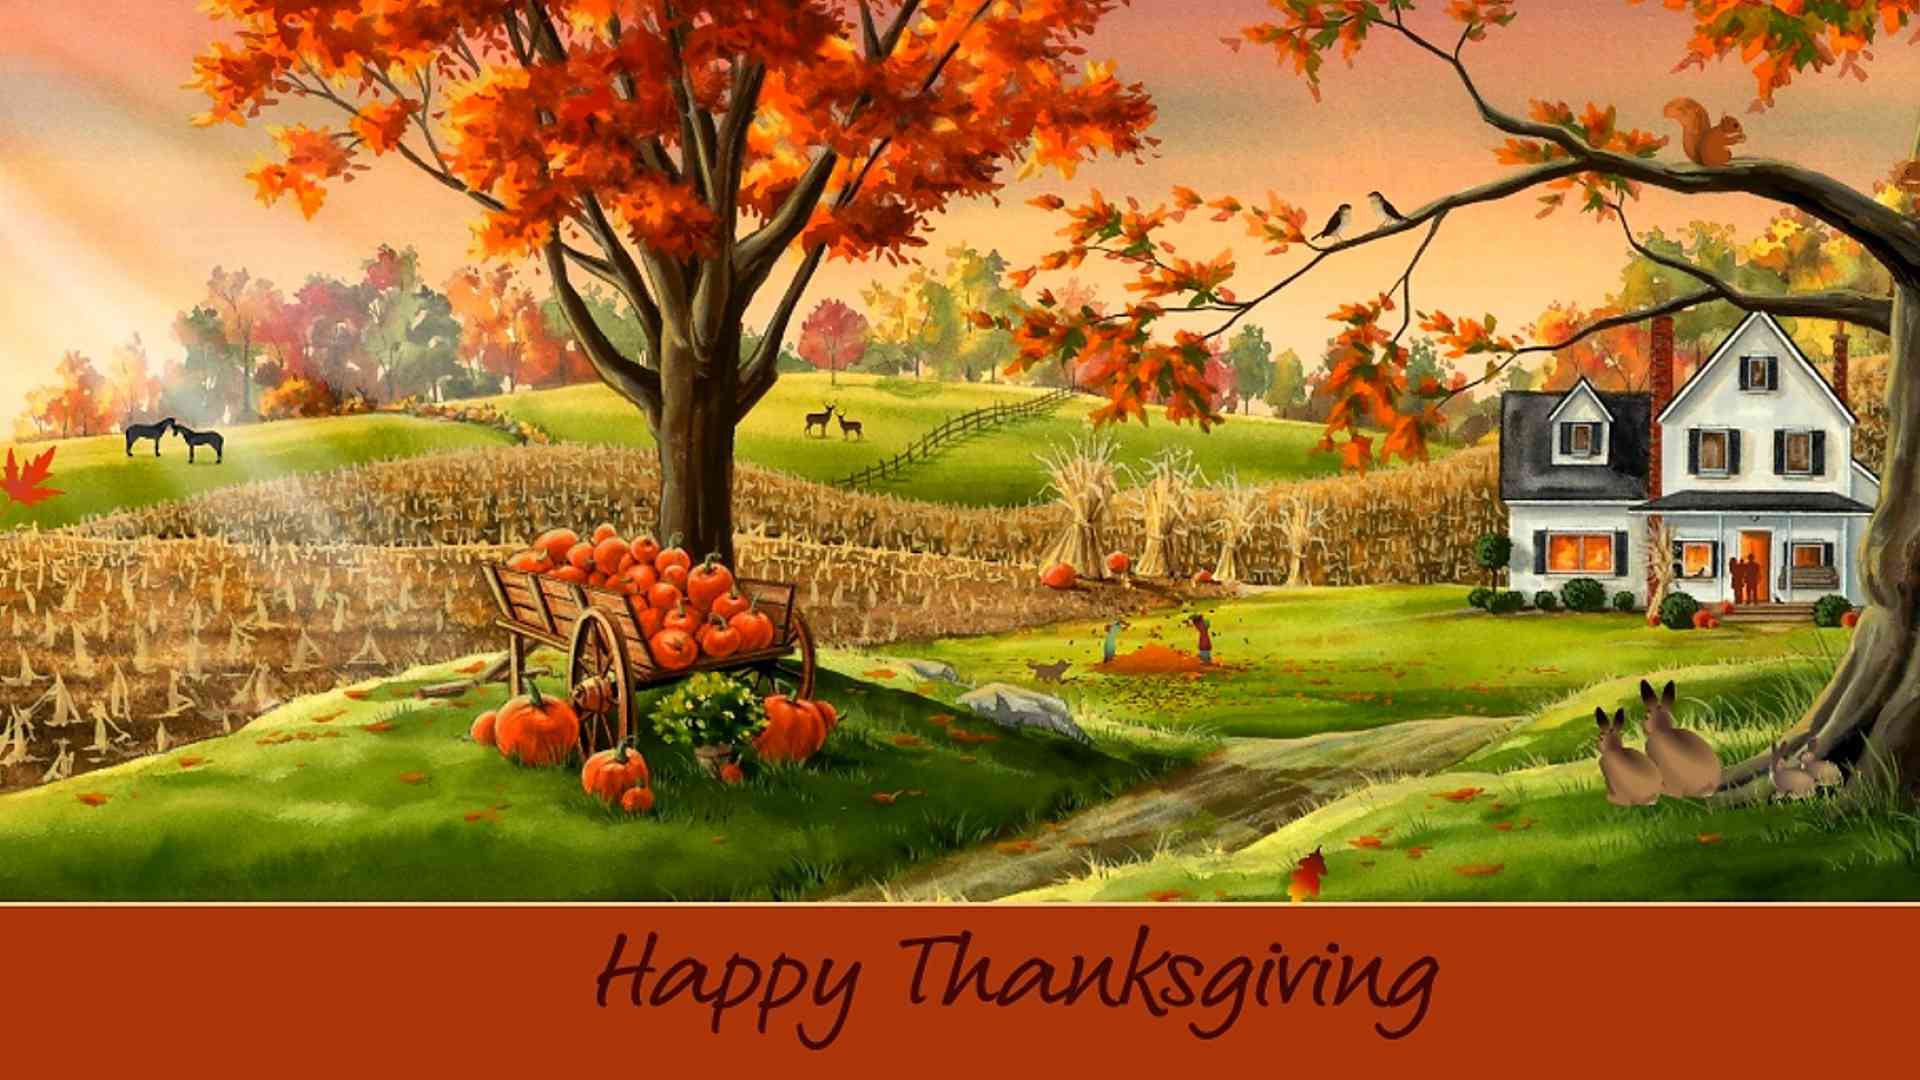 Download Thanksgiving HD Wallpapers